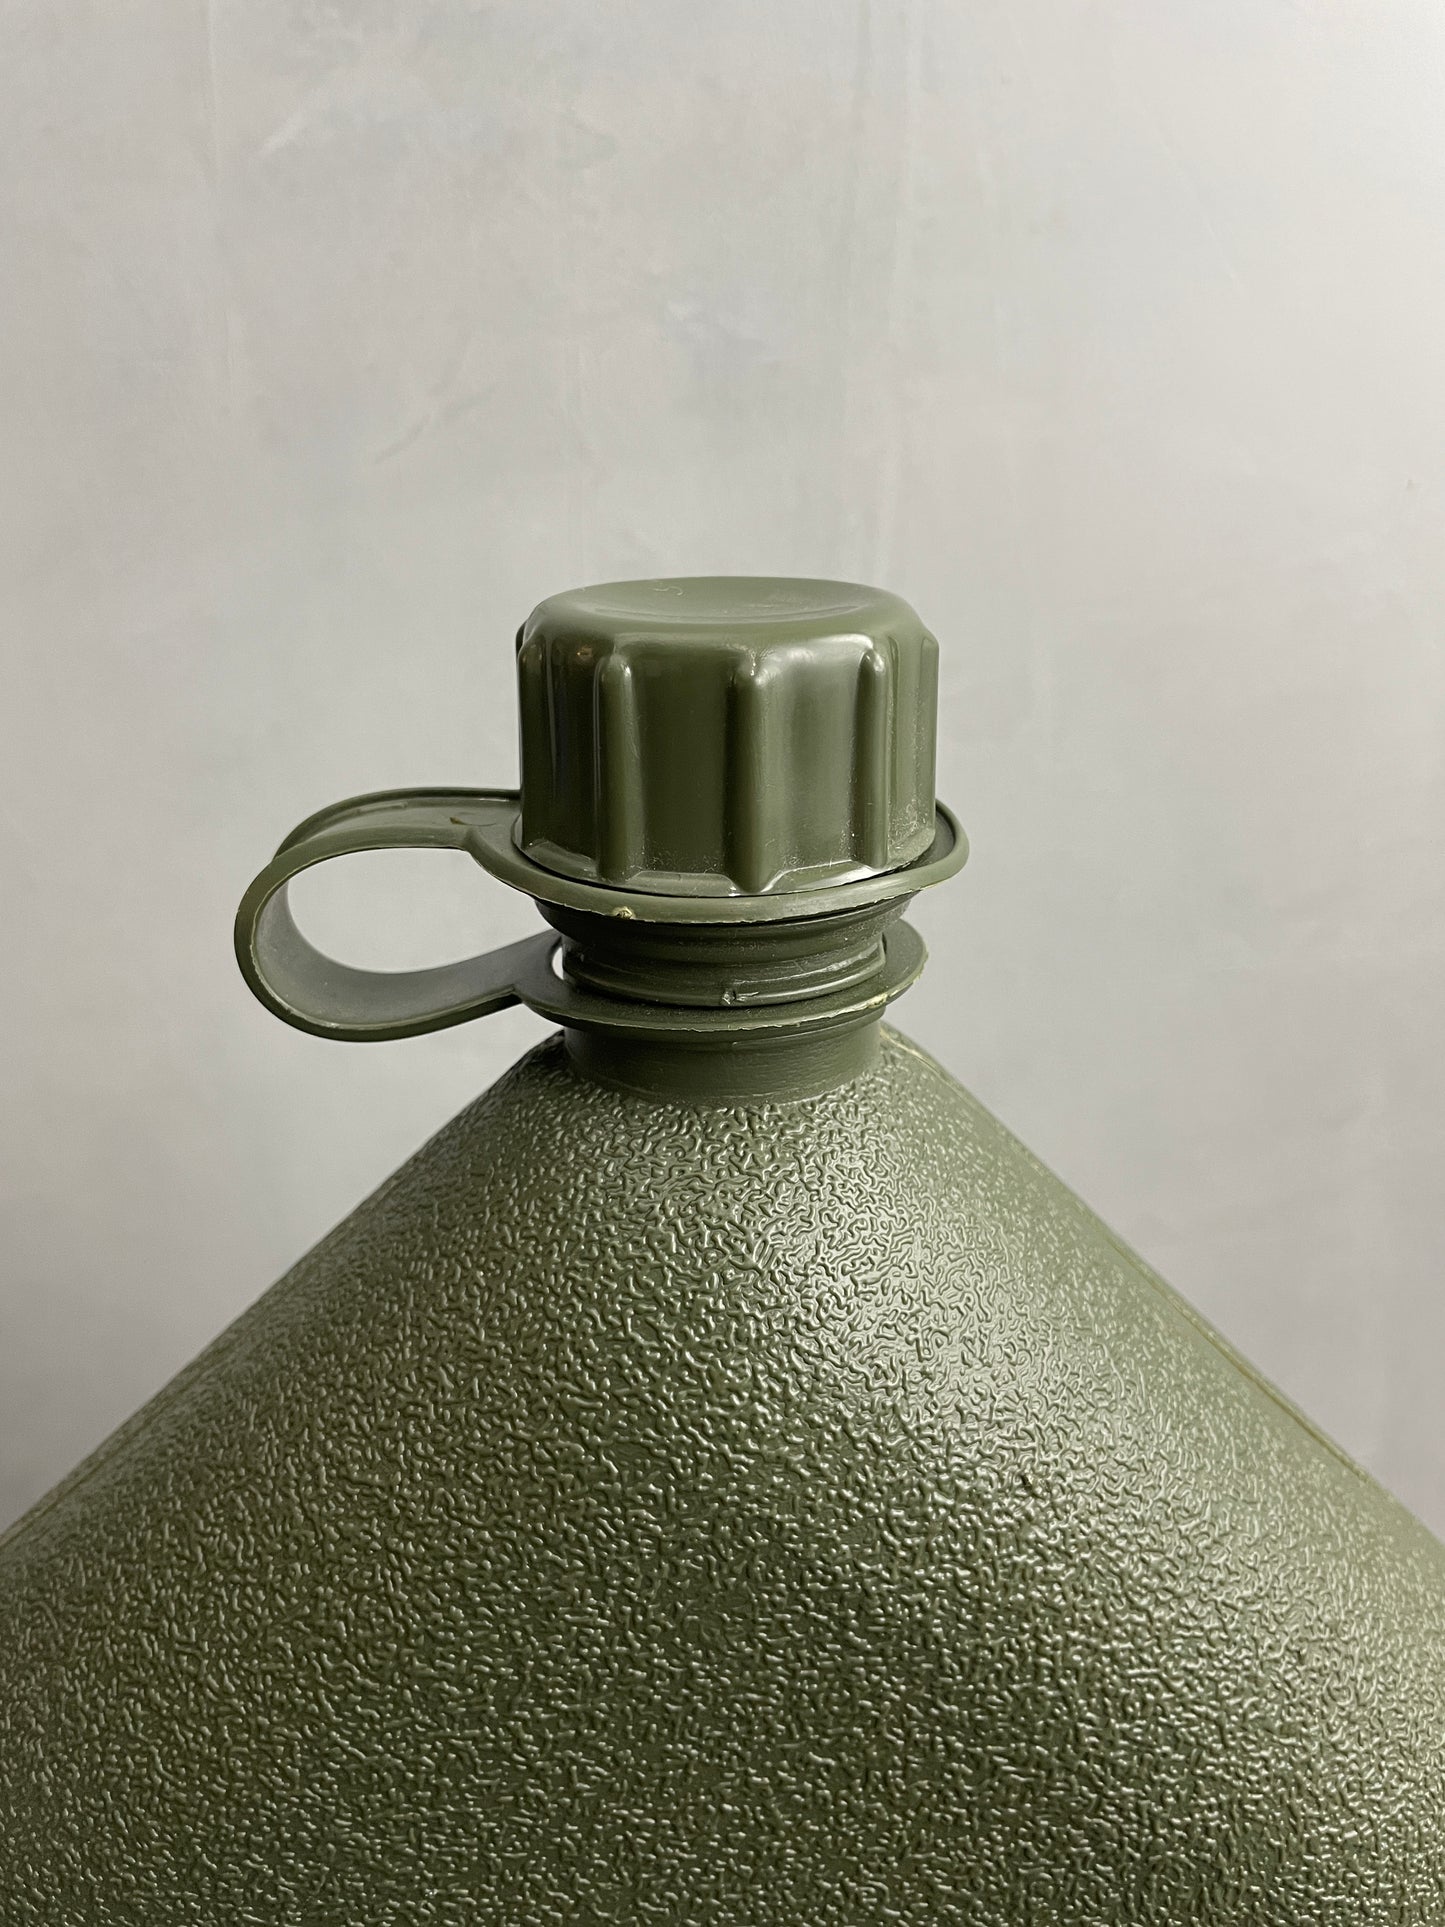 US Army Water Canteen